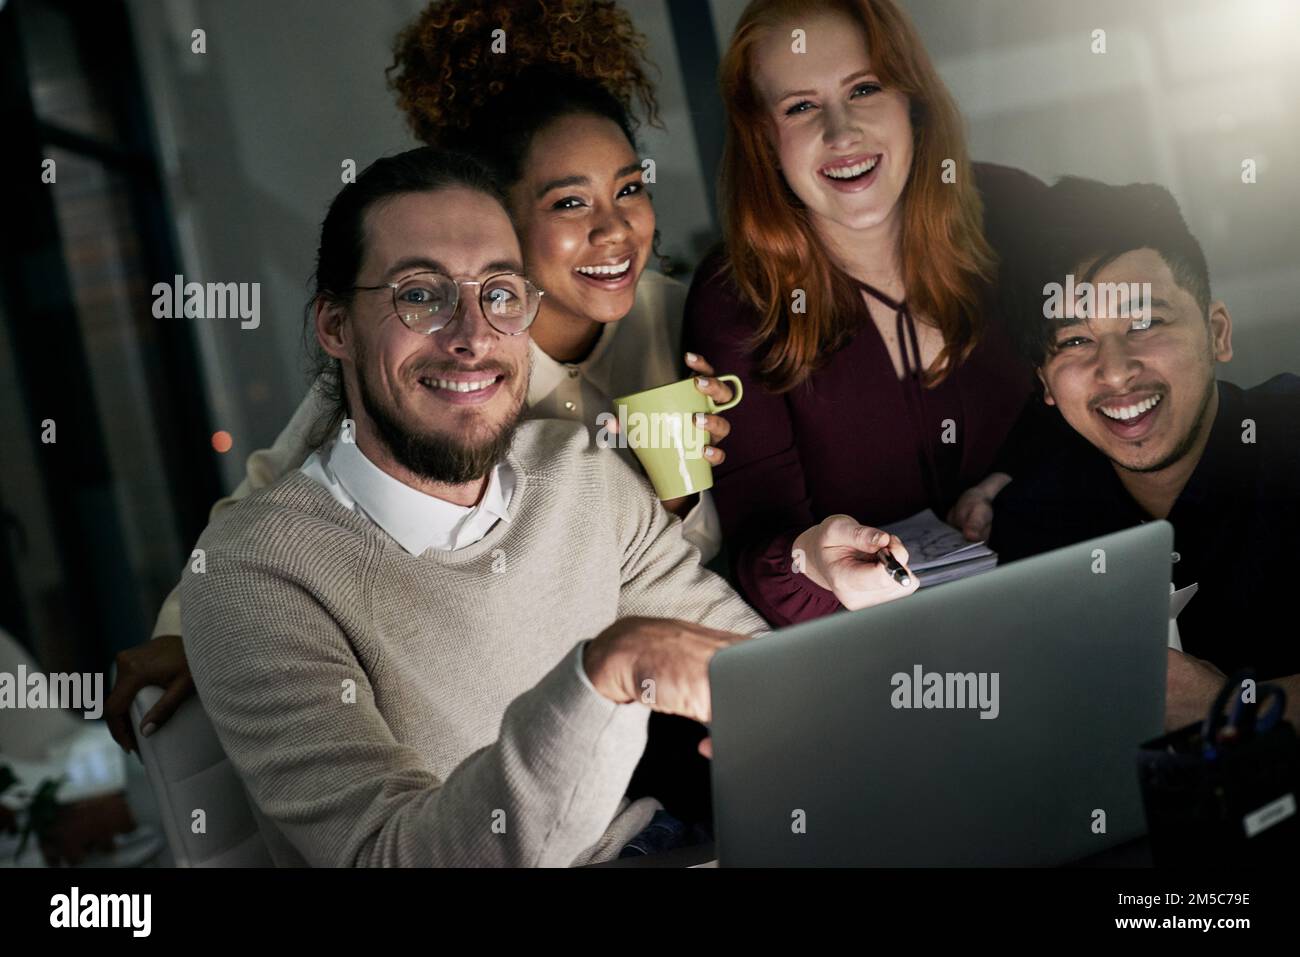 Were the design team you need. Portrait of a group of young designers working late in the office. Stock Photo